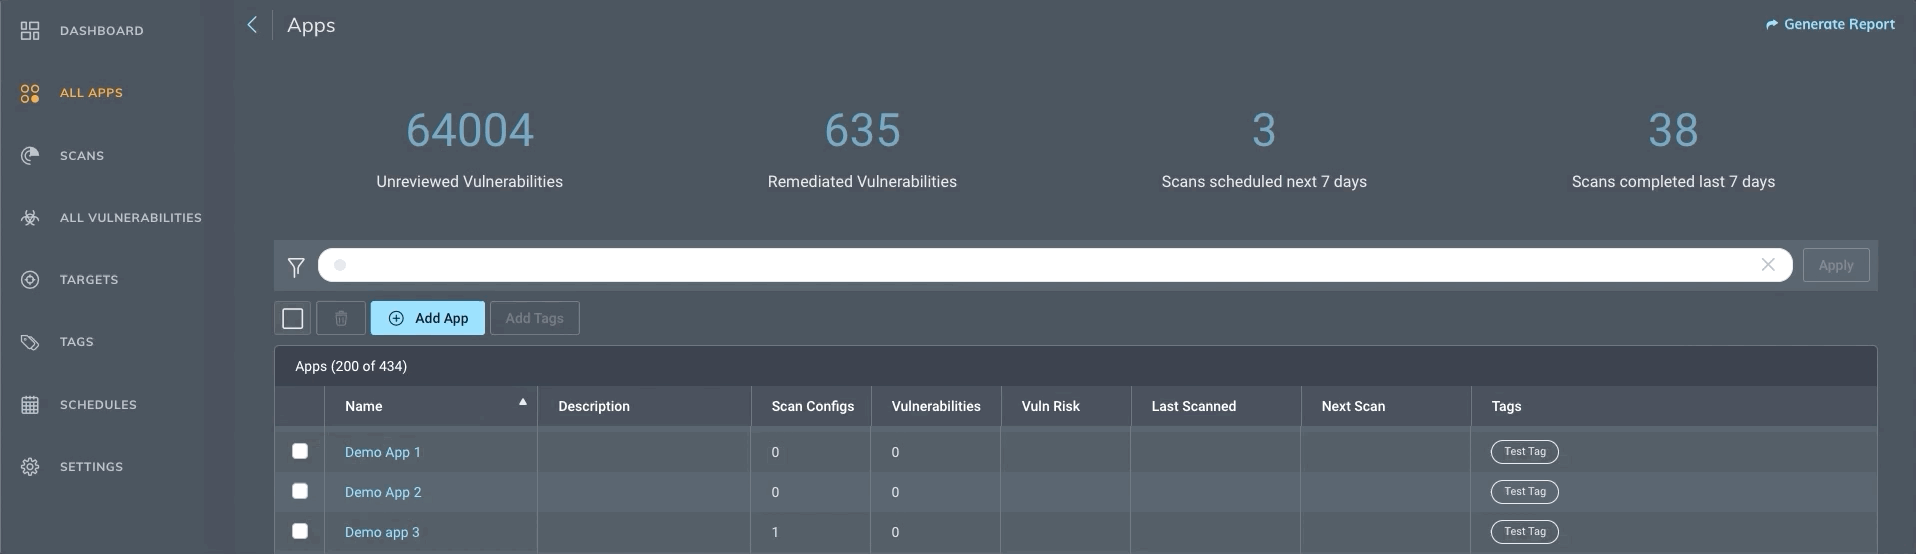 New reports in Rapid7 InsightVM and InsightAppSec allow you to get a single view into your full-stack vulnerability risk management.